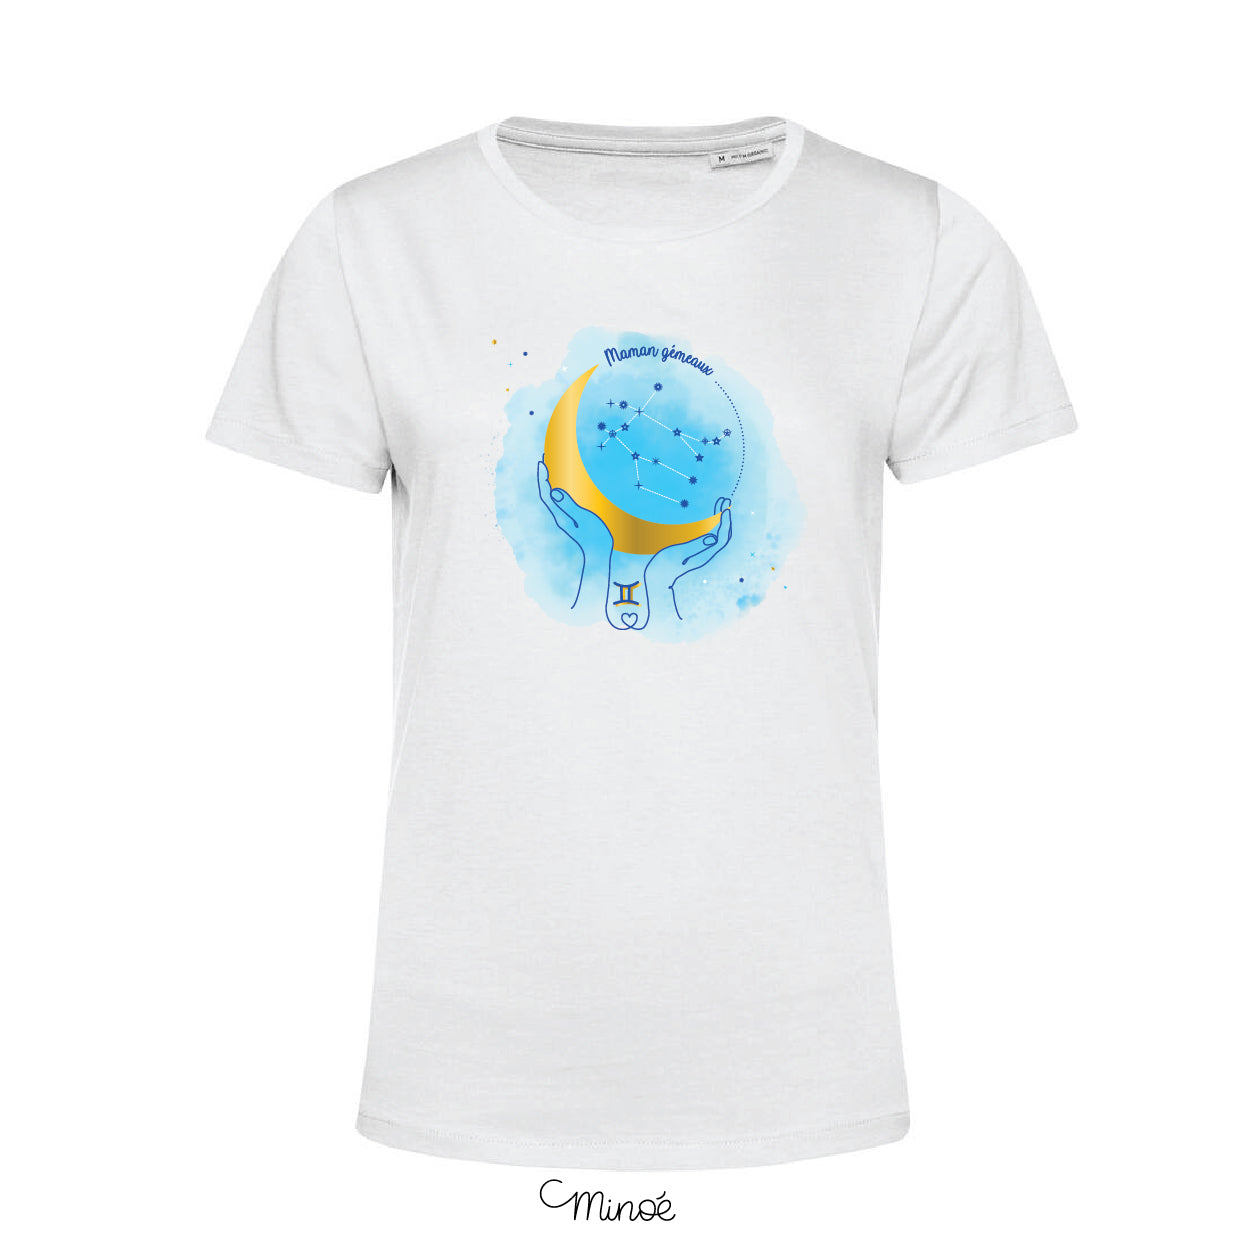 T-shirt femme col rond - collection astro